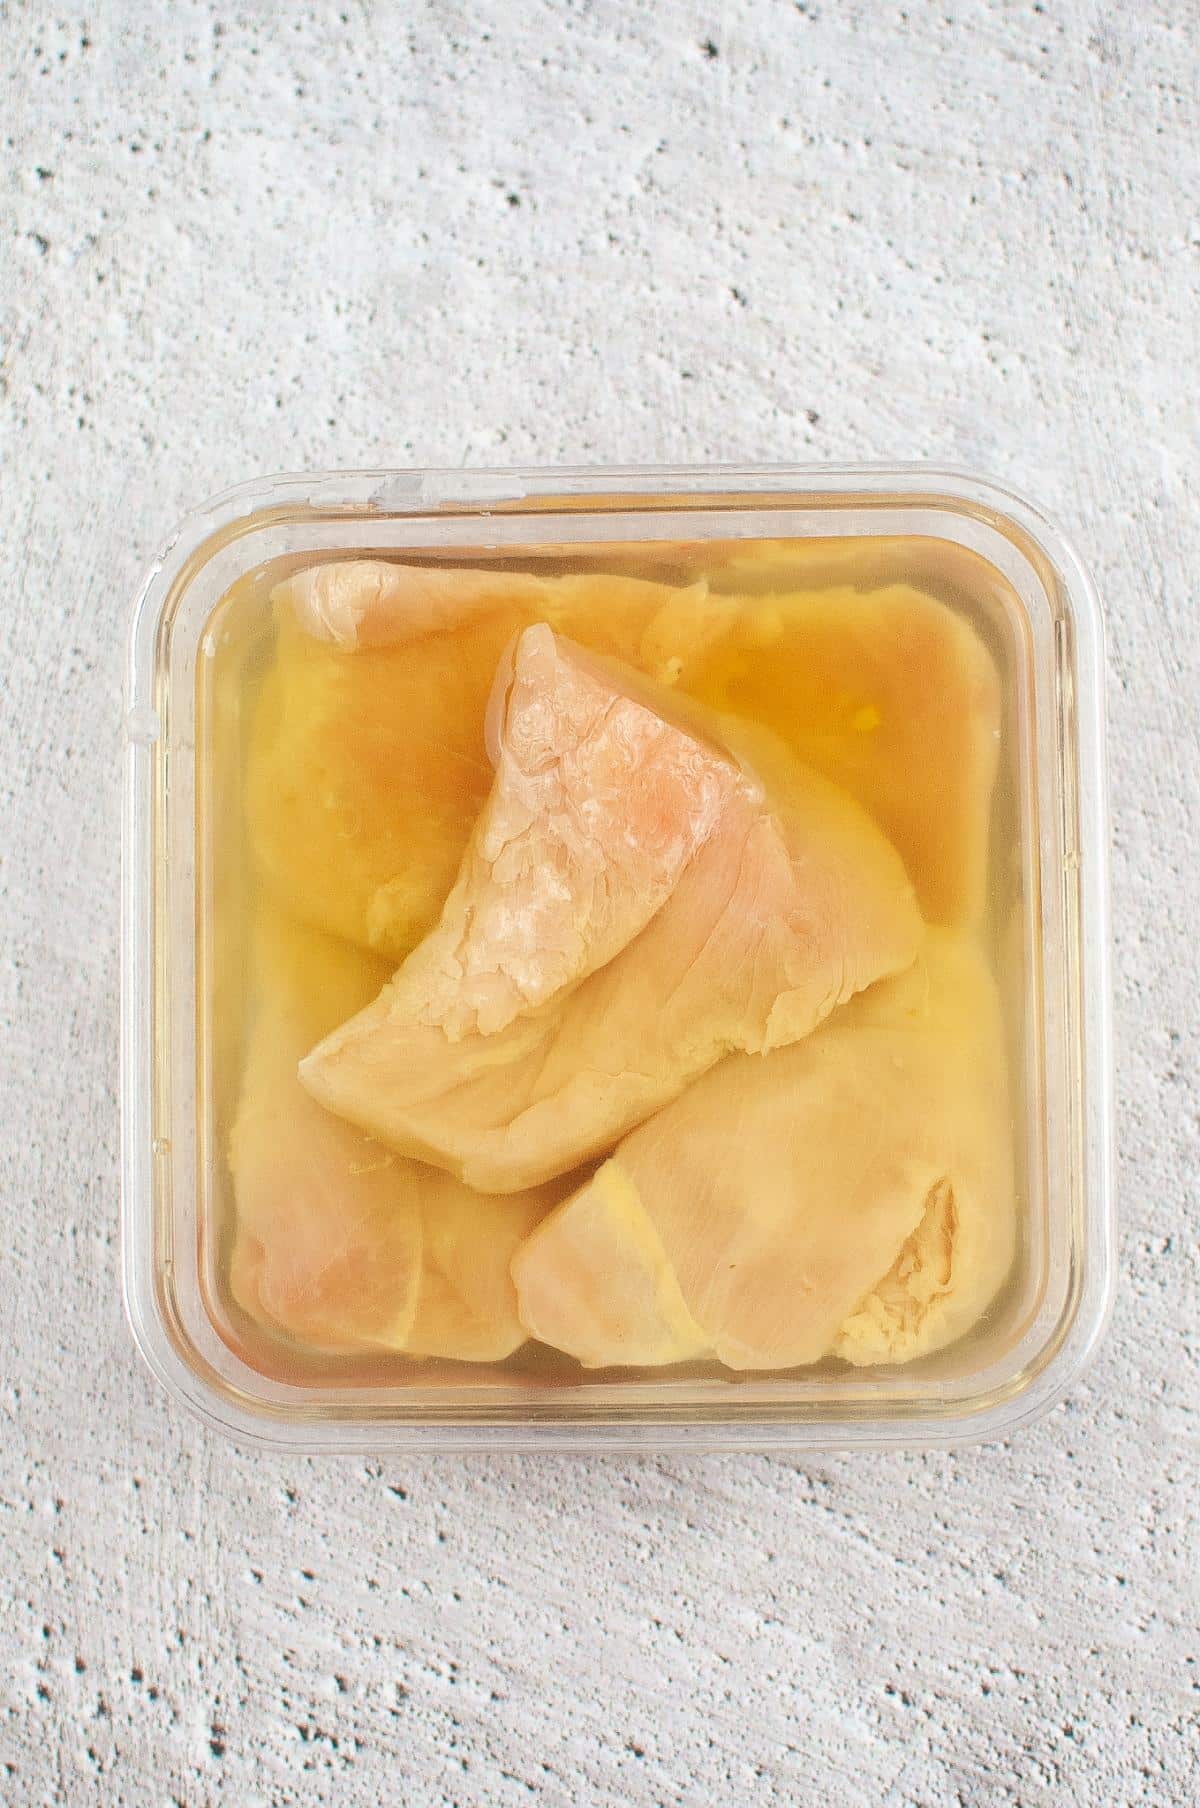 A glass bowl, which is filled with pickle juice and water, is used to marinate chicken breasts.